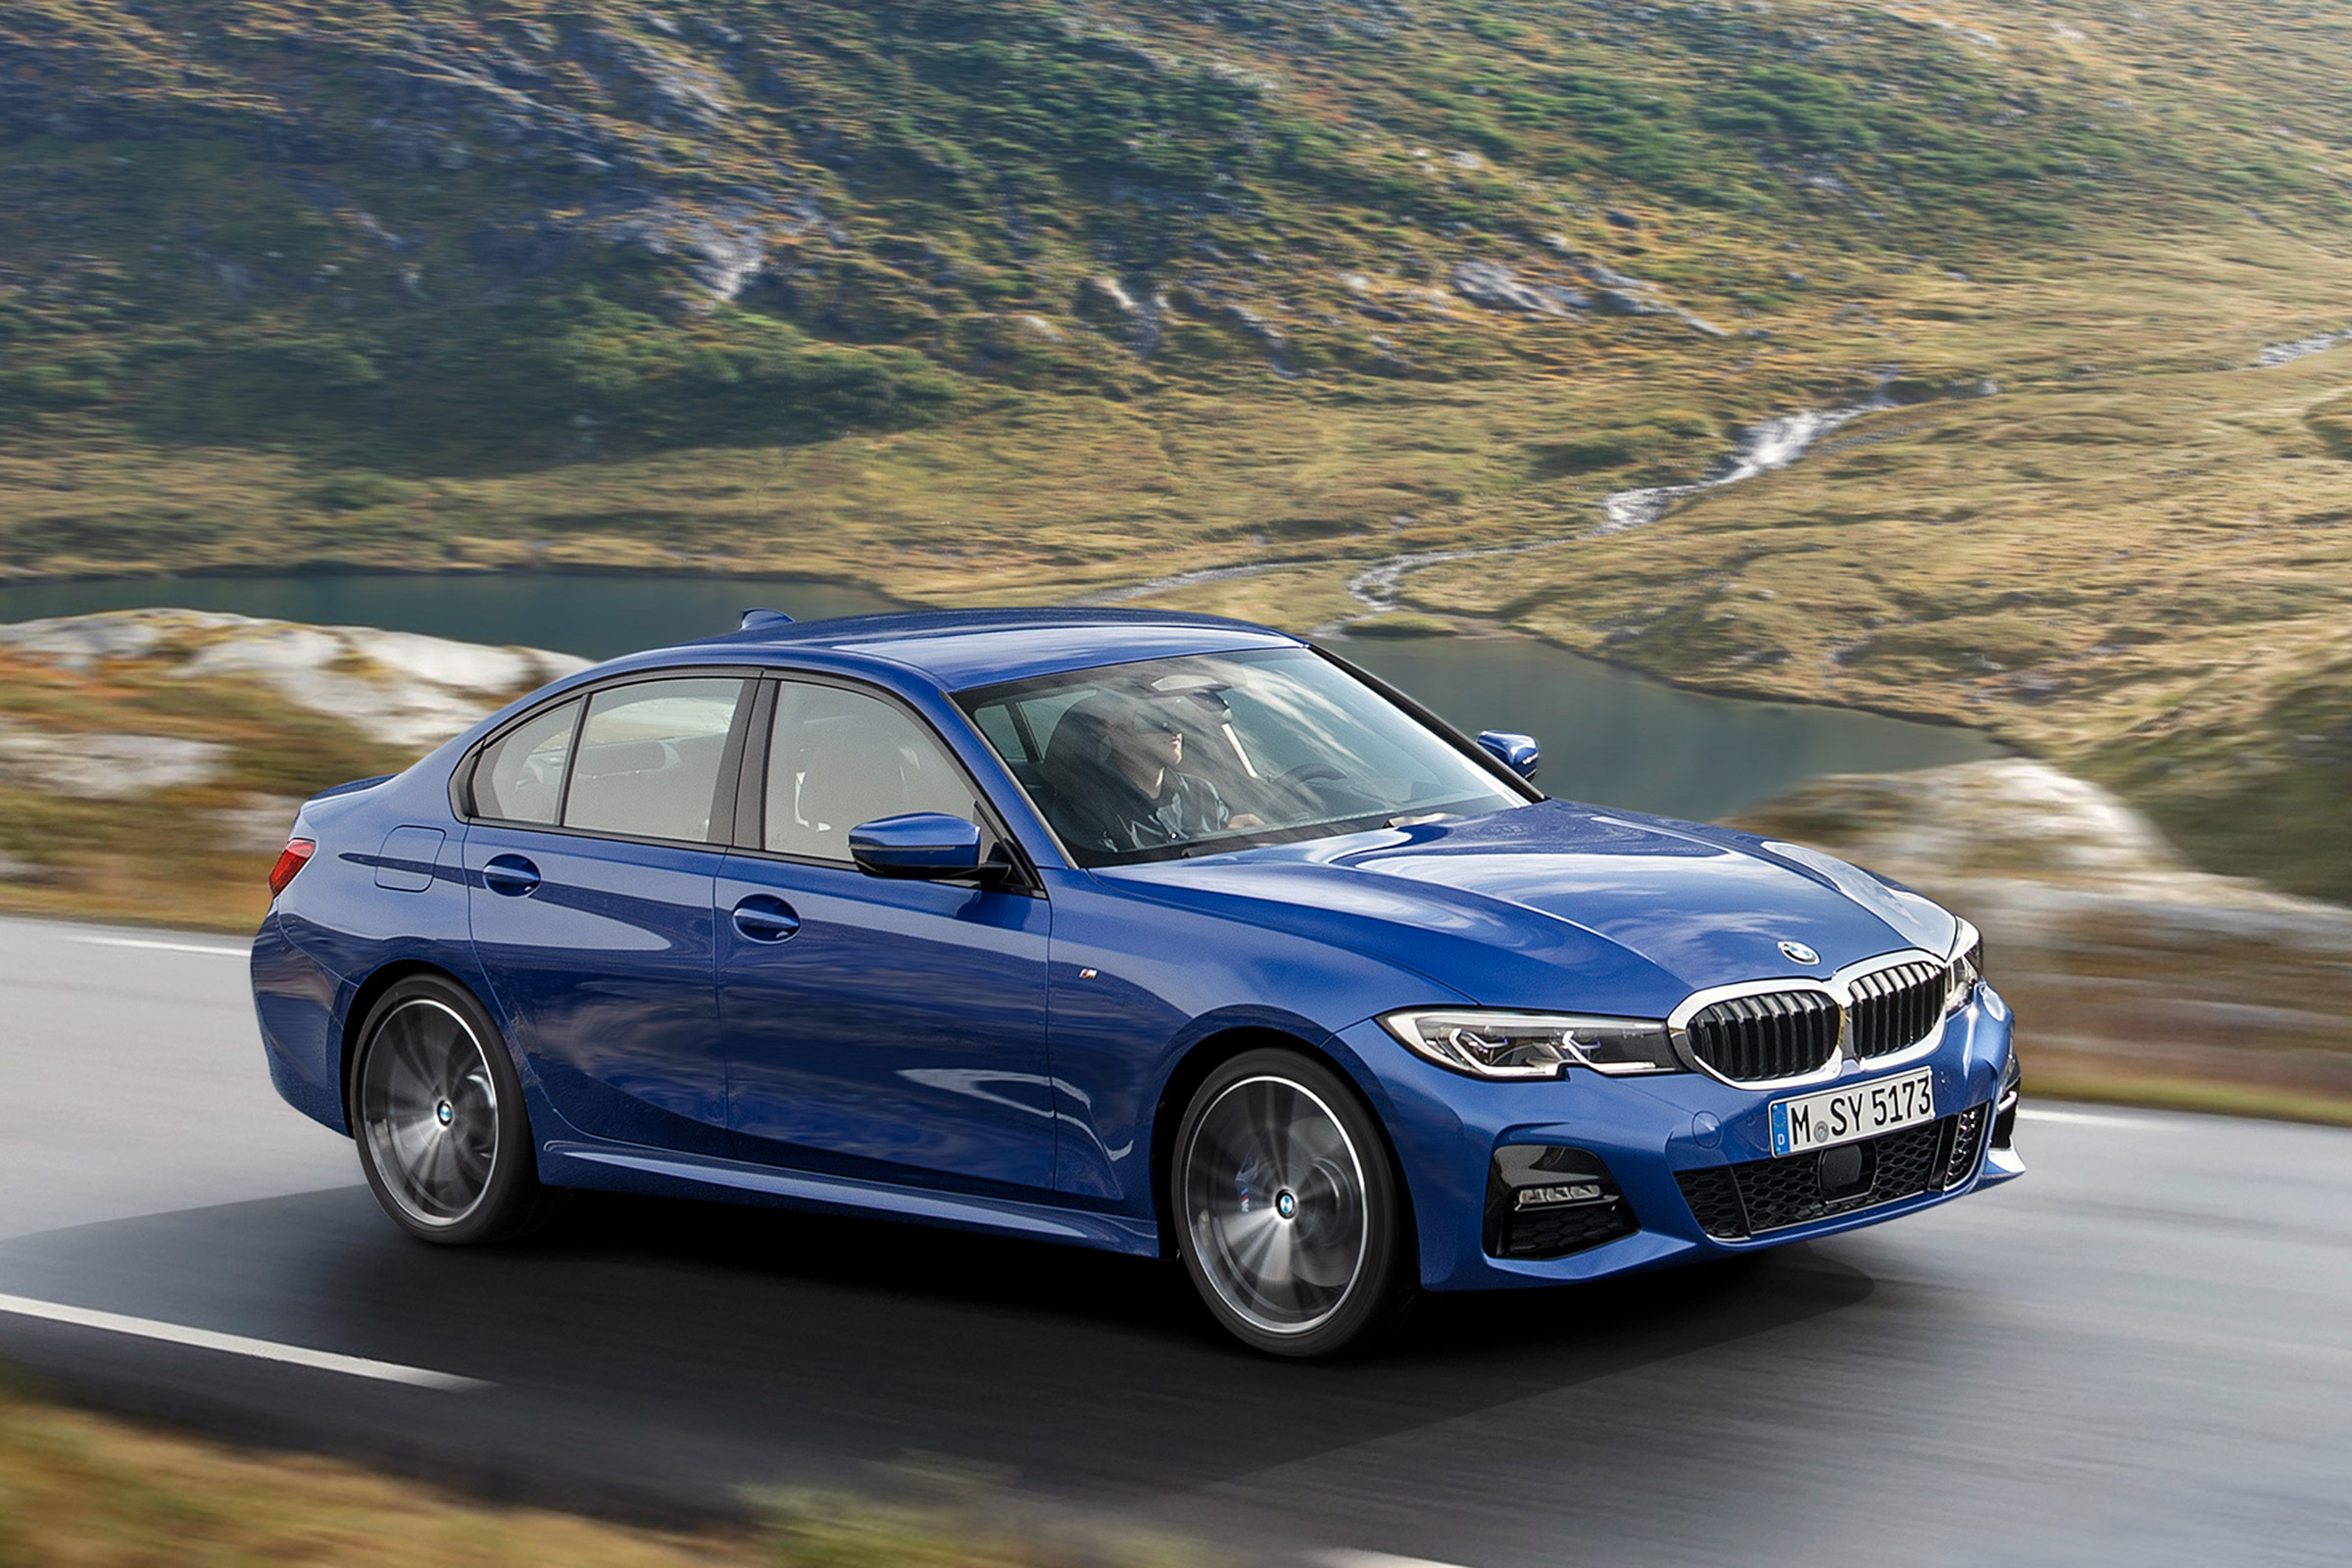 BMW 'G20' 3-series revealed - pictures | Evo